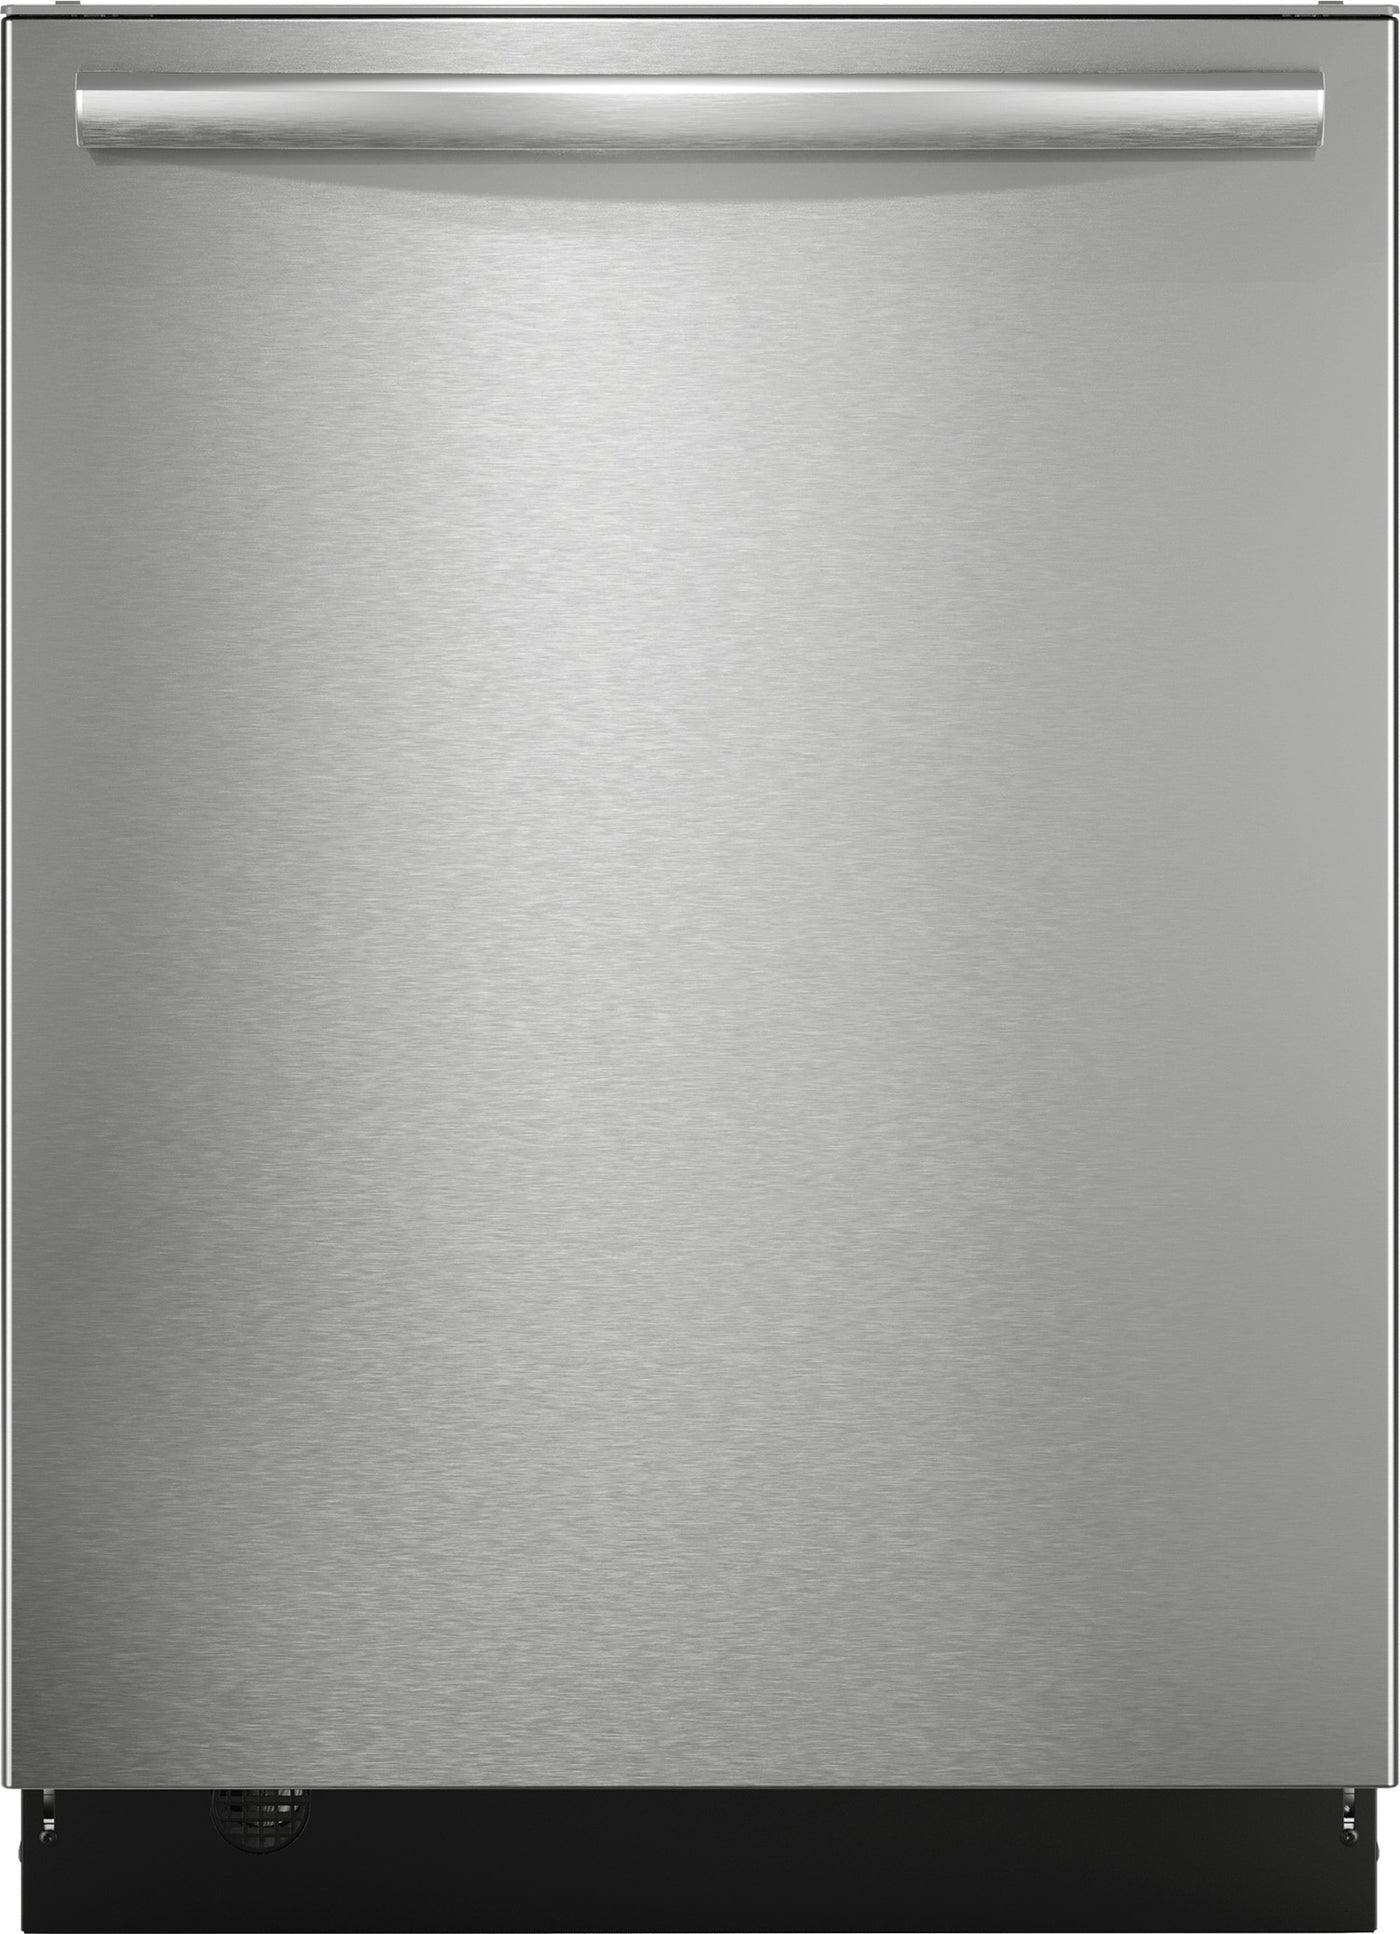 Frigidaire Gallery 24" Smudge-Proof™ Stainless Steel Dishwasher with CleanBoost™ (47 dBA) - GDSH4715AF